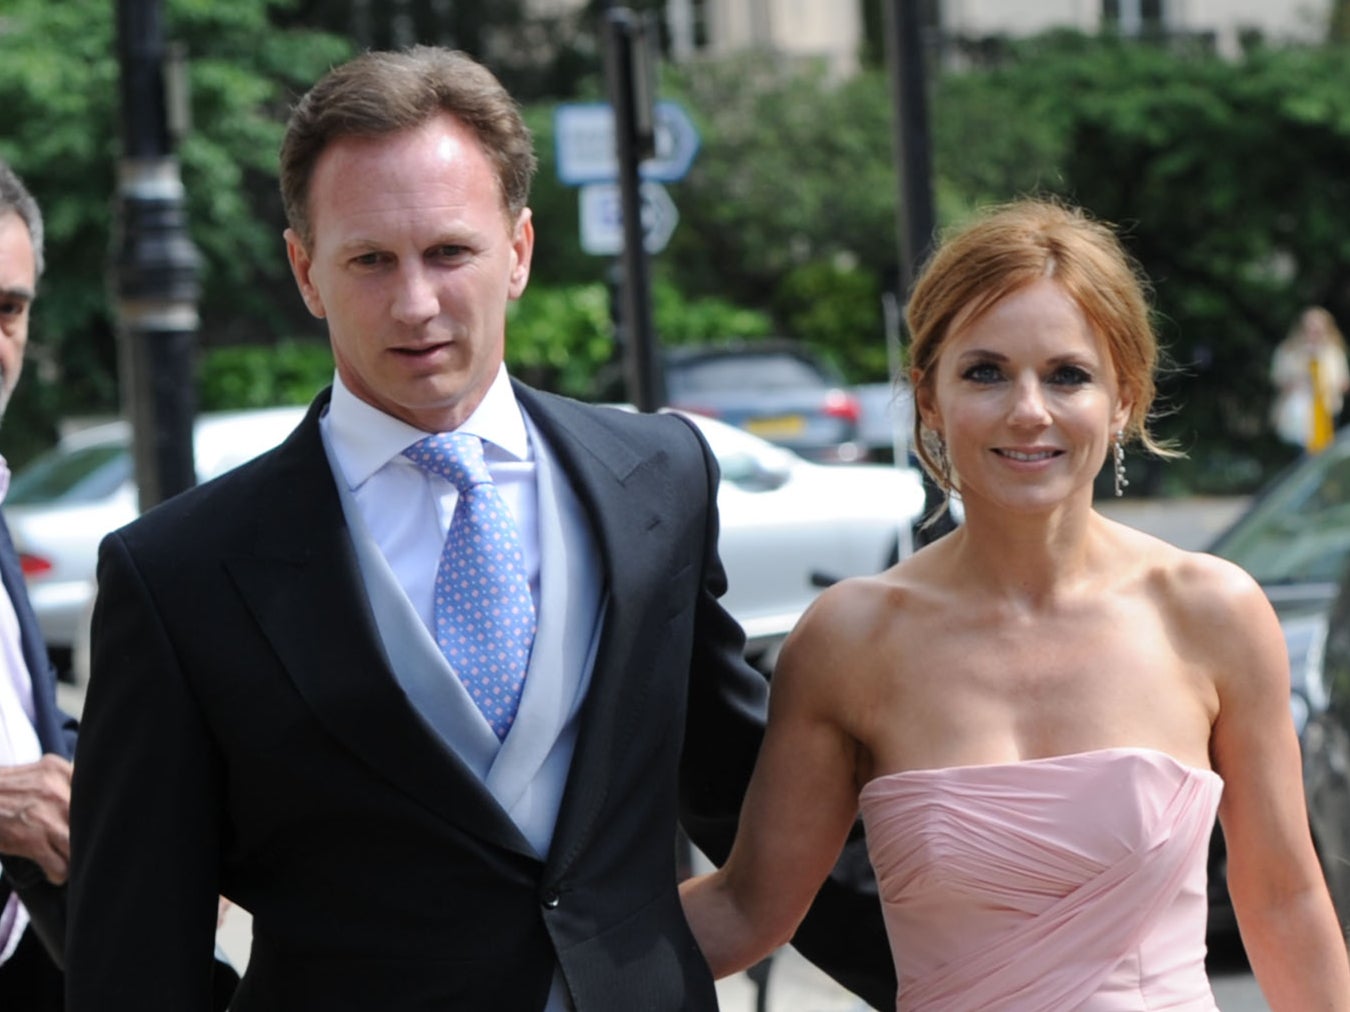 Christian Horner and Geri Halliwell attend the wedding of Poppy Delevingne and James Cook